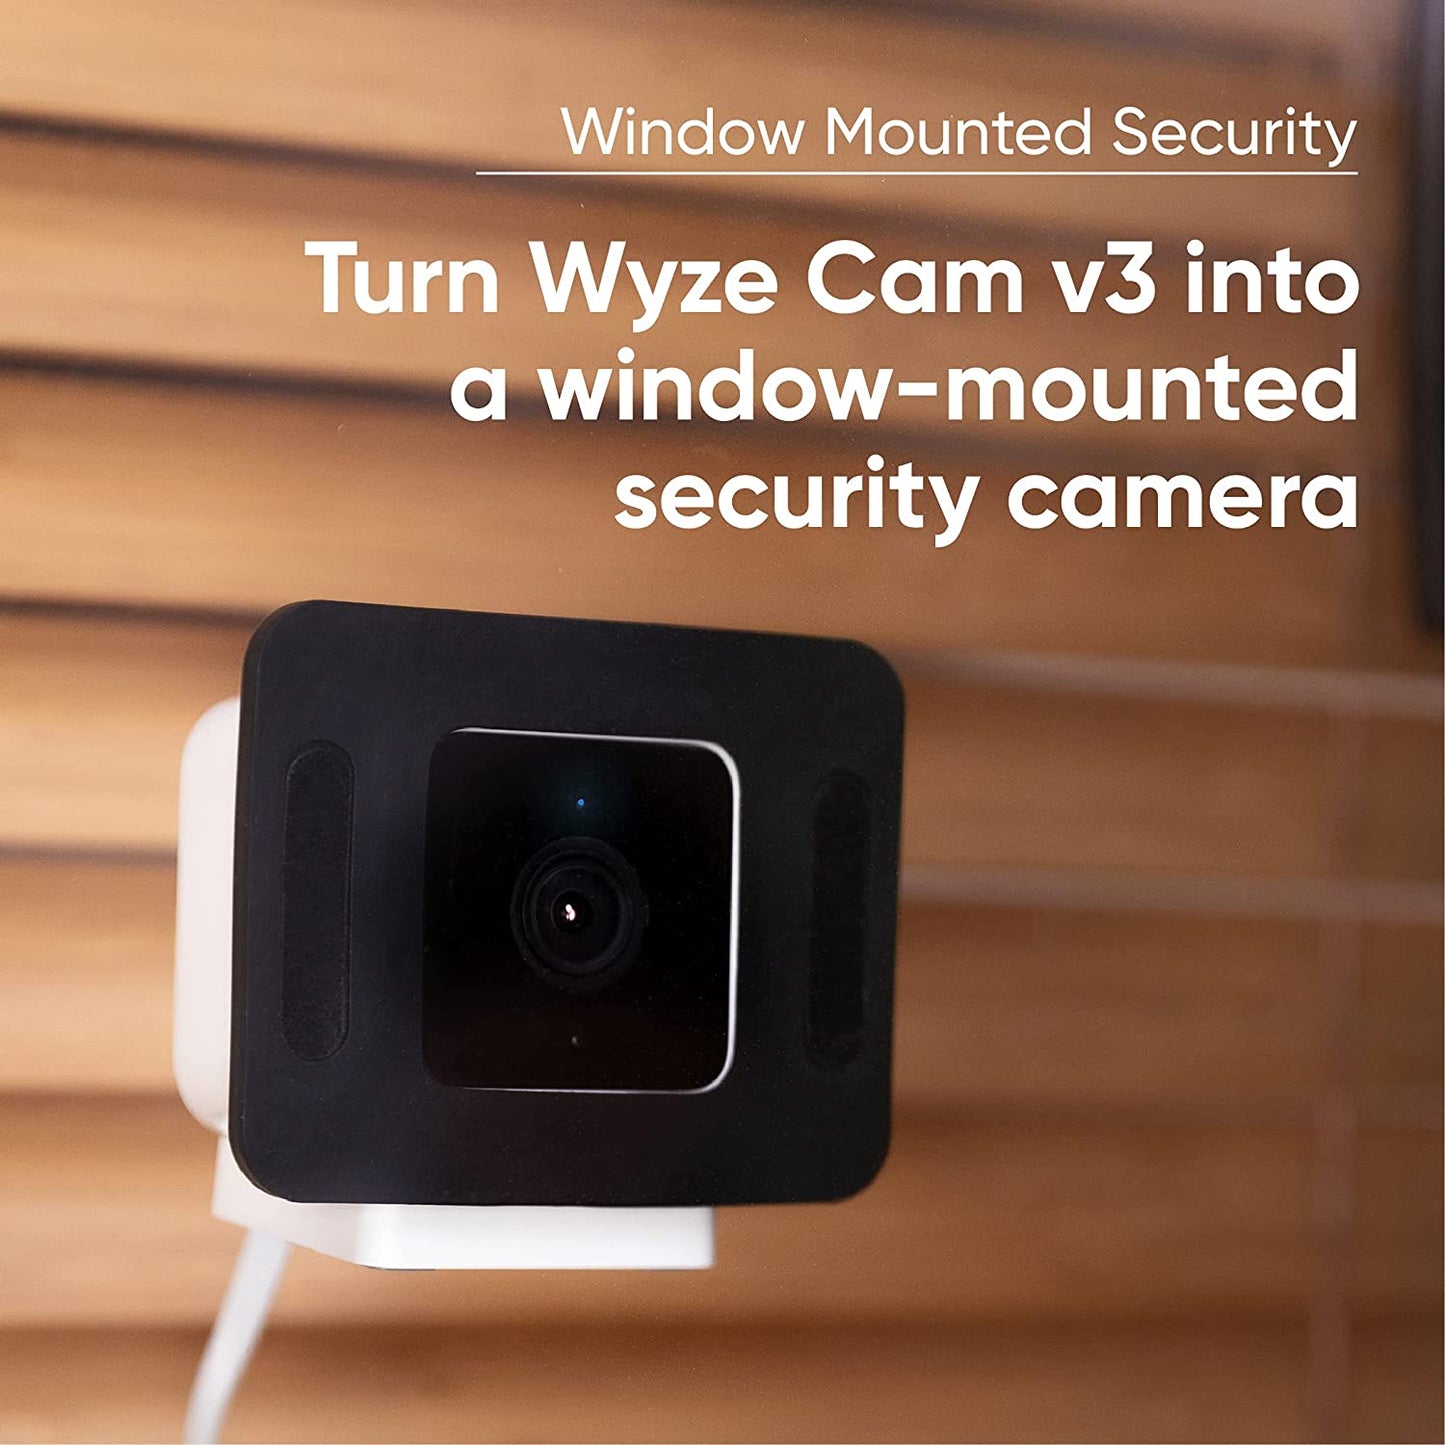 Black window mount with a Wyze Cam v3 attached. Text overlay that says "Window Mounted Security."